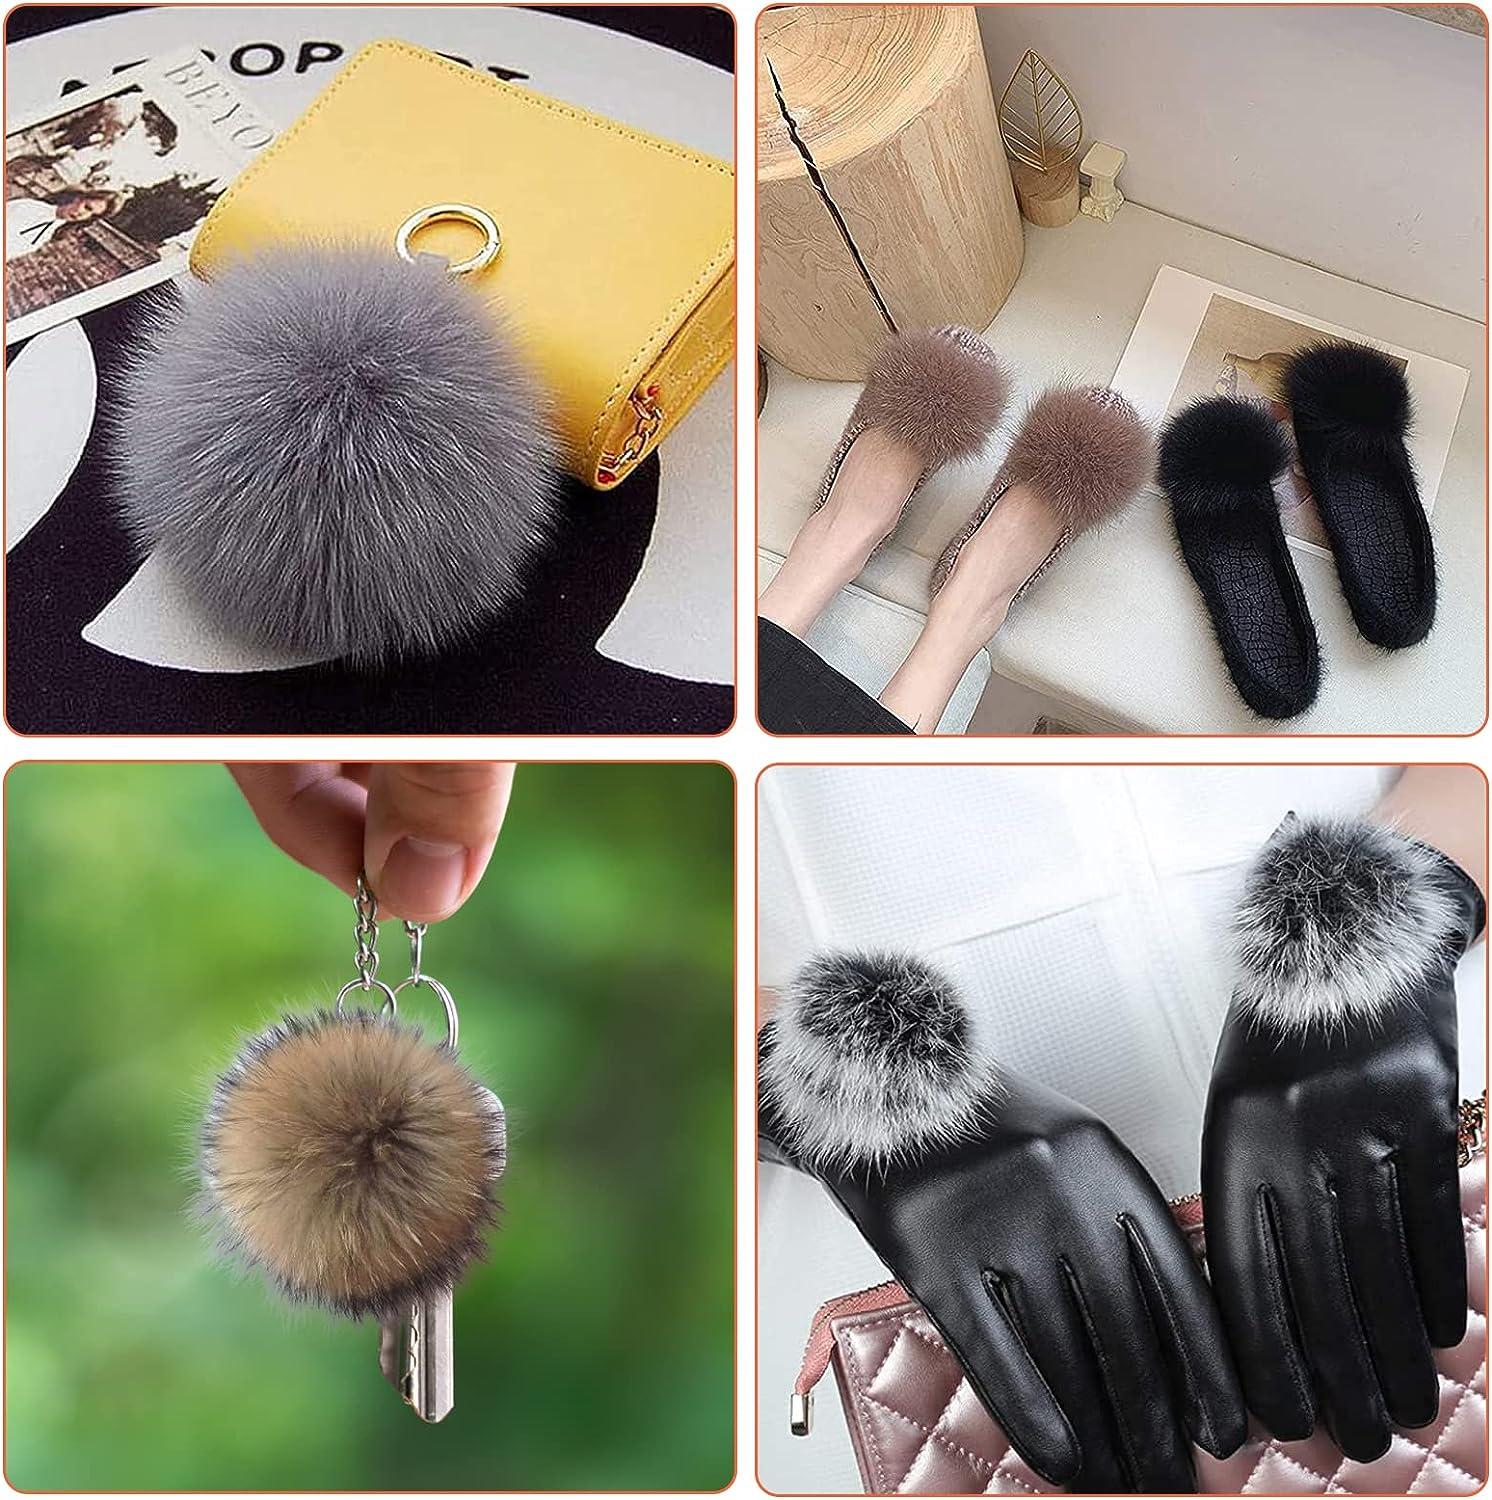  Pom Poms for Hats 6.7 Inch Bulk Faux Fur with Snaps Large Soft  Pom Pom Fluffy Balls Removable Knitting Accessories for Shoes Gloves Bags  Scarves Keychain 5 Pieces